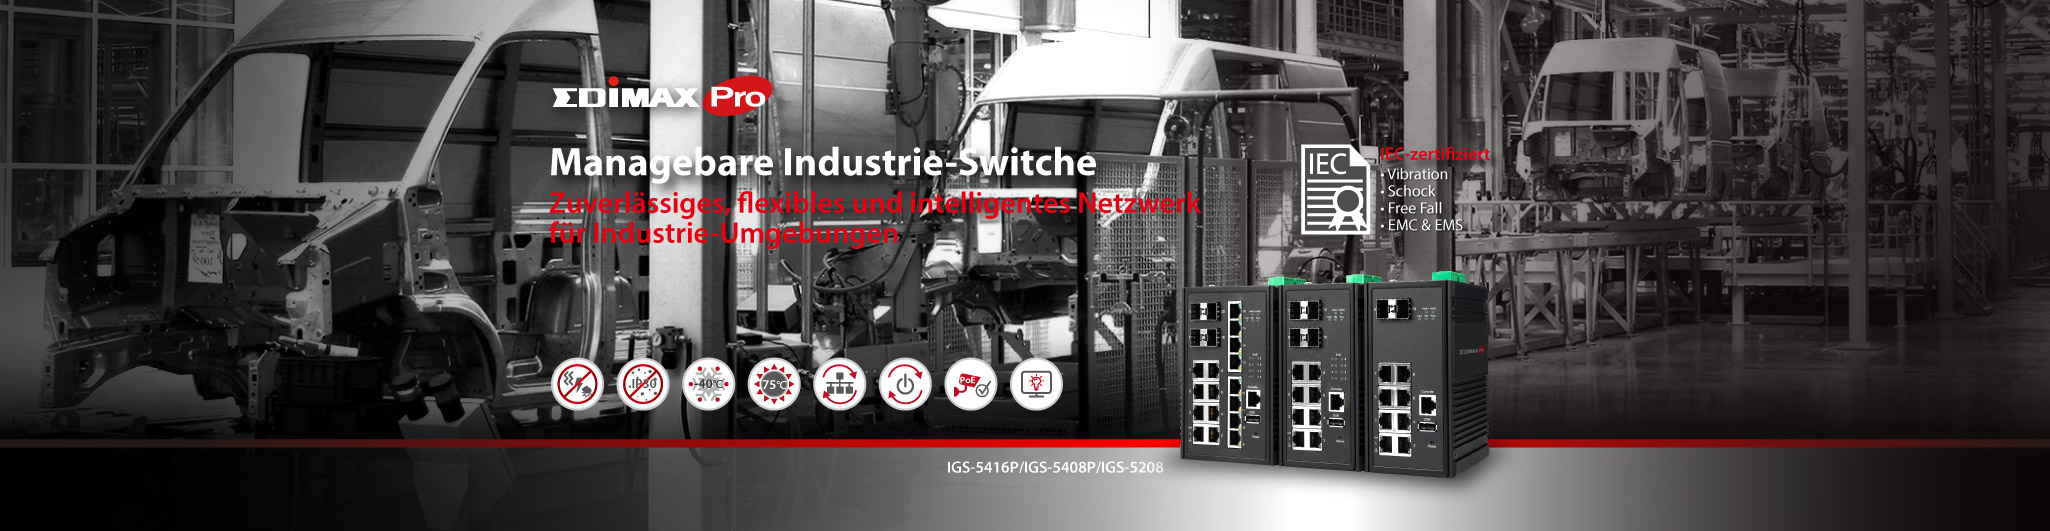 Edimax Pro Industrial Switch, Gigabit, PoE+, web managed, durable, reliable, rugged, ruggized, IIoT, Smart City, City Surveillance, Transportation, Smart Factory, Factory Automation, Manufacturing, Automotive, energy plant